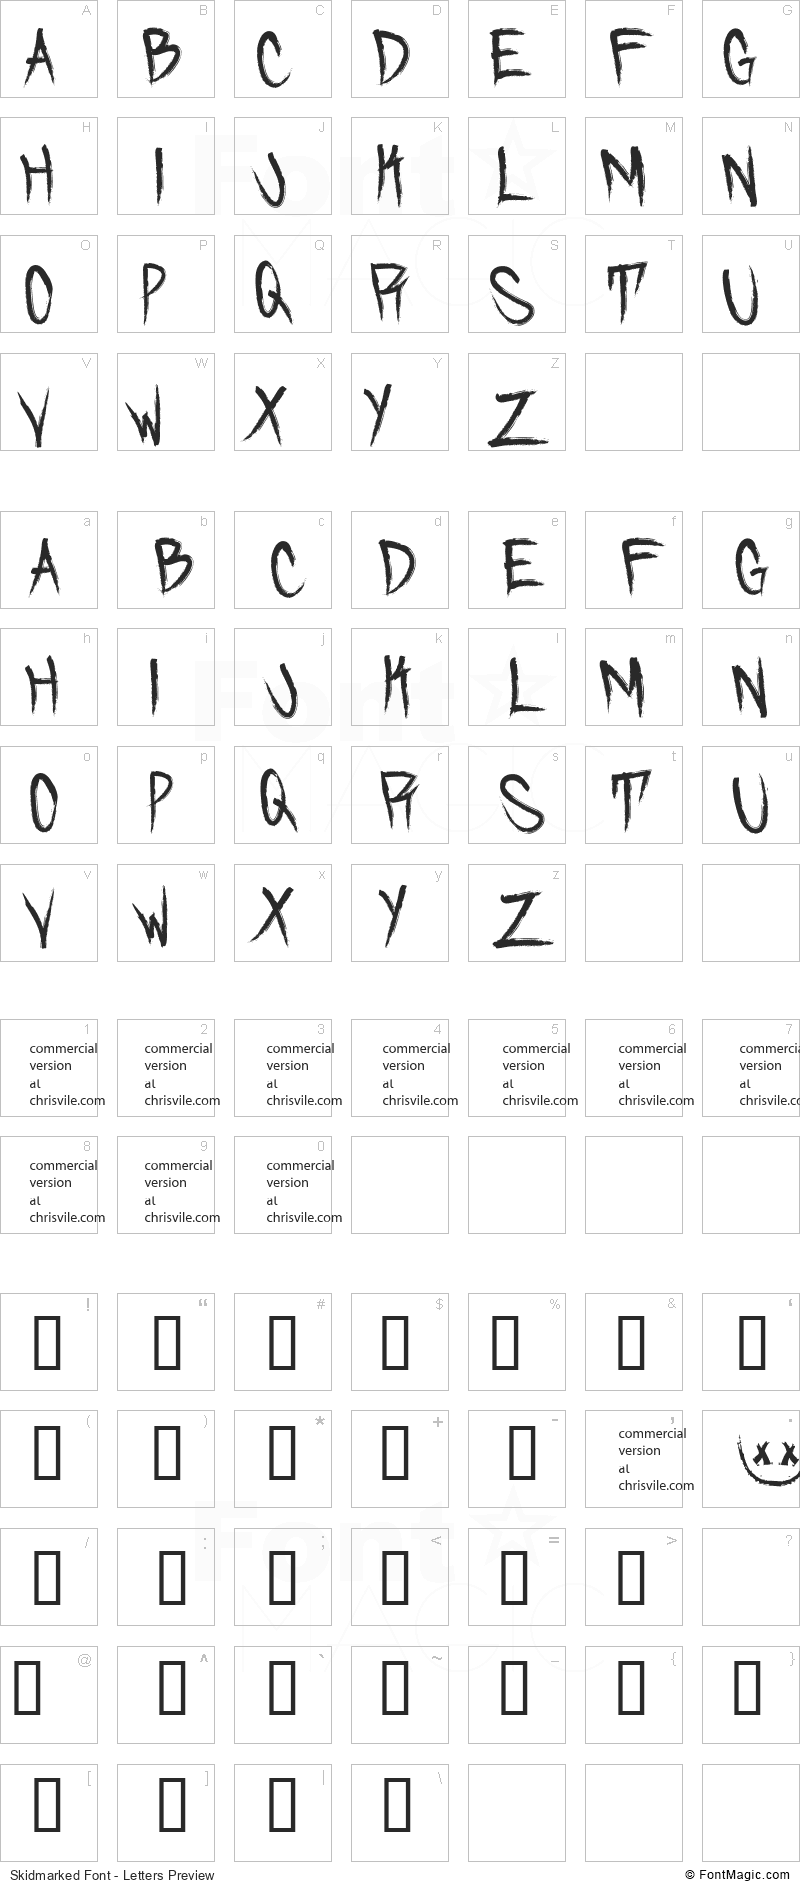 Skidmarked Font - All Latters Preview Chart